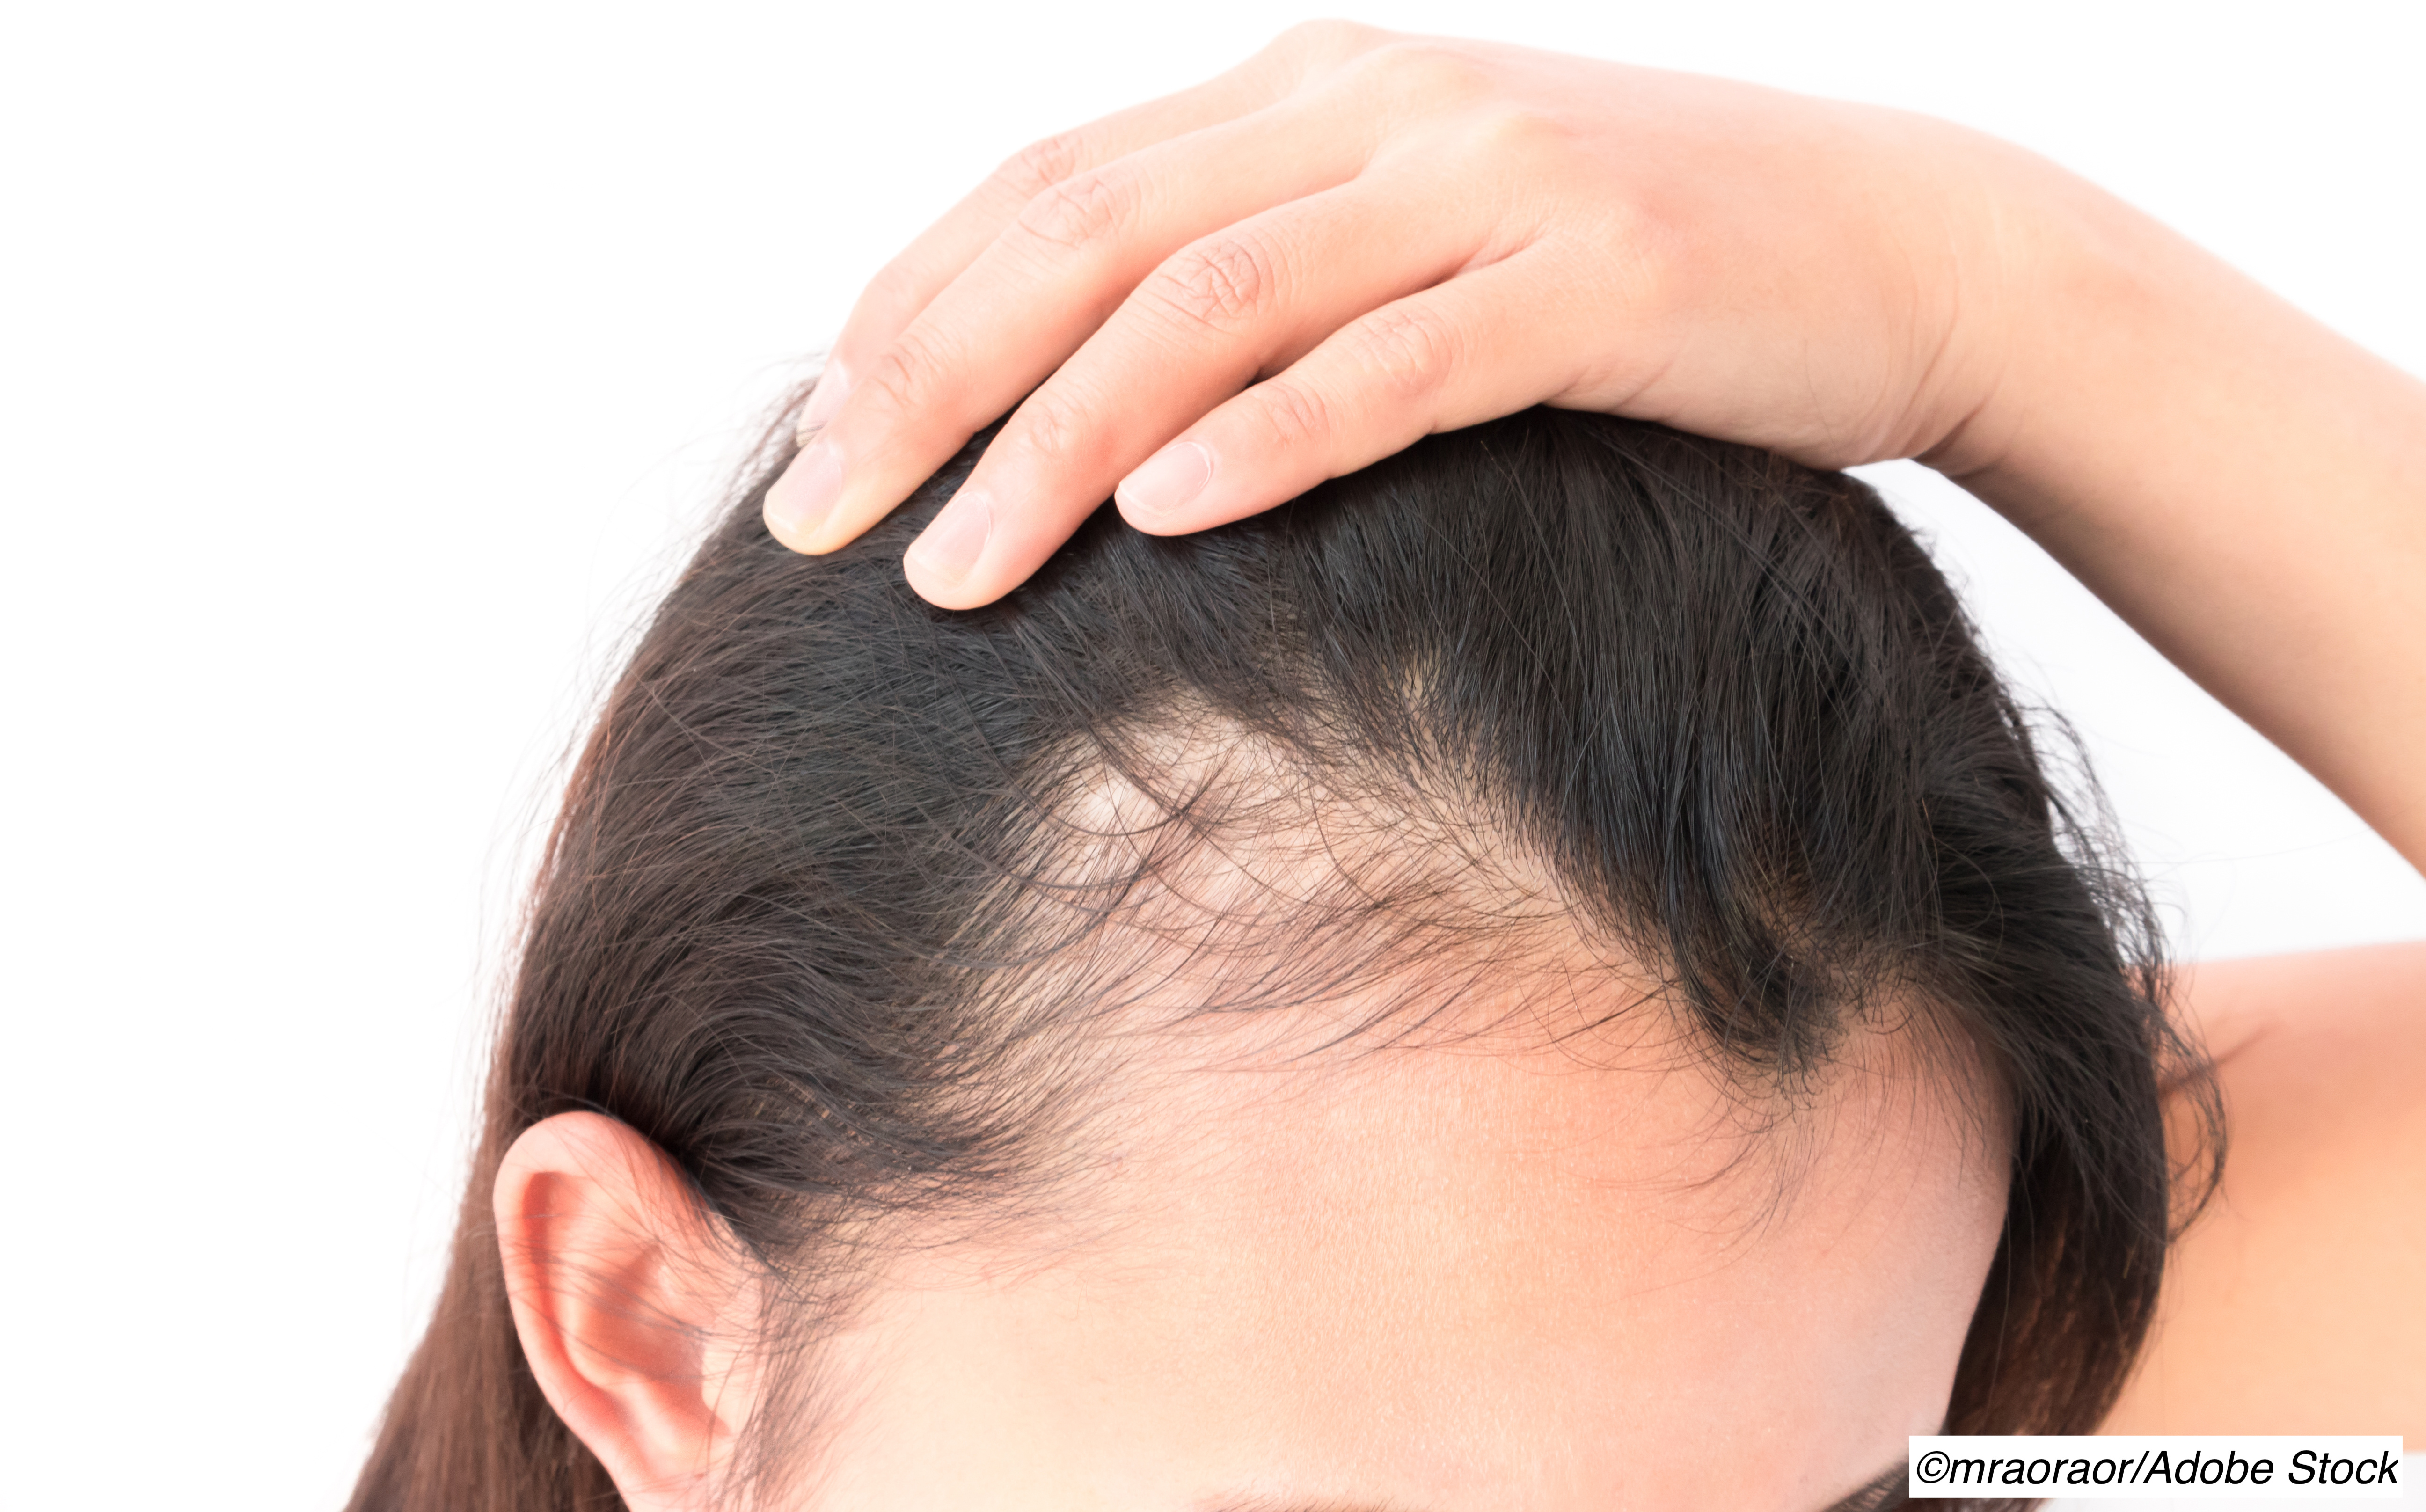 Low-Dose Oral Minoxidil Deemed Safe for Hair Growth - Physician's Weekly